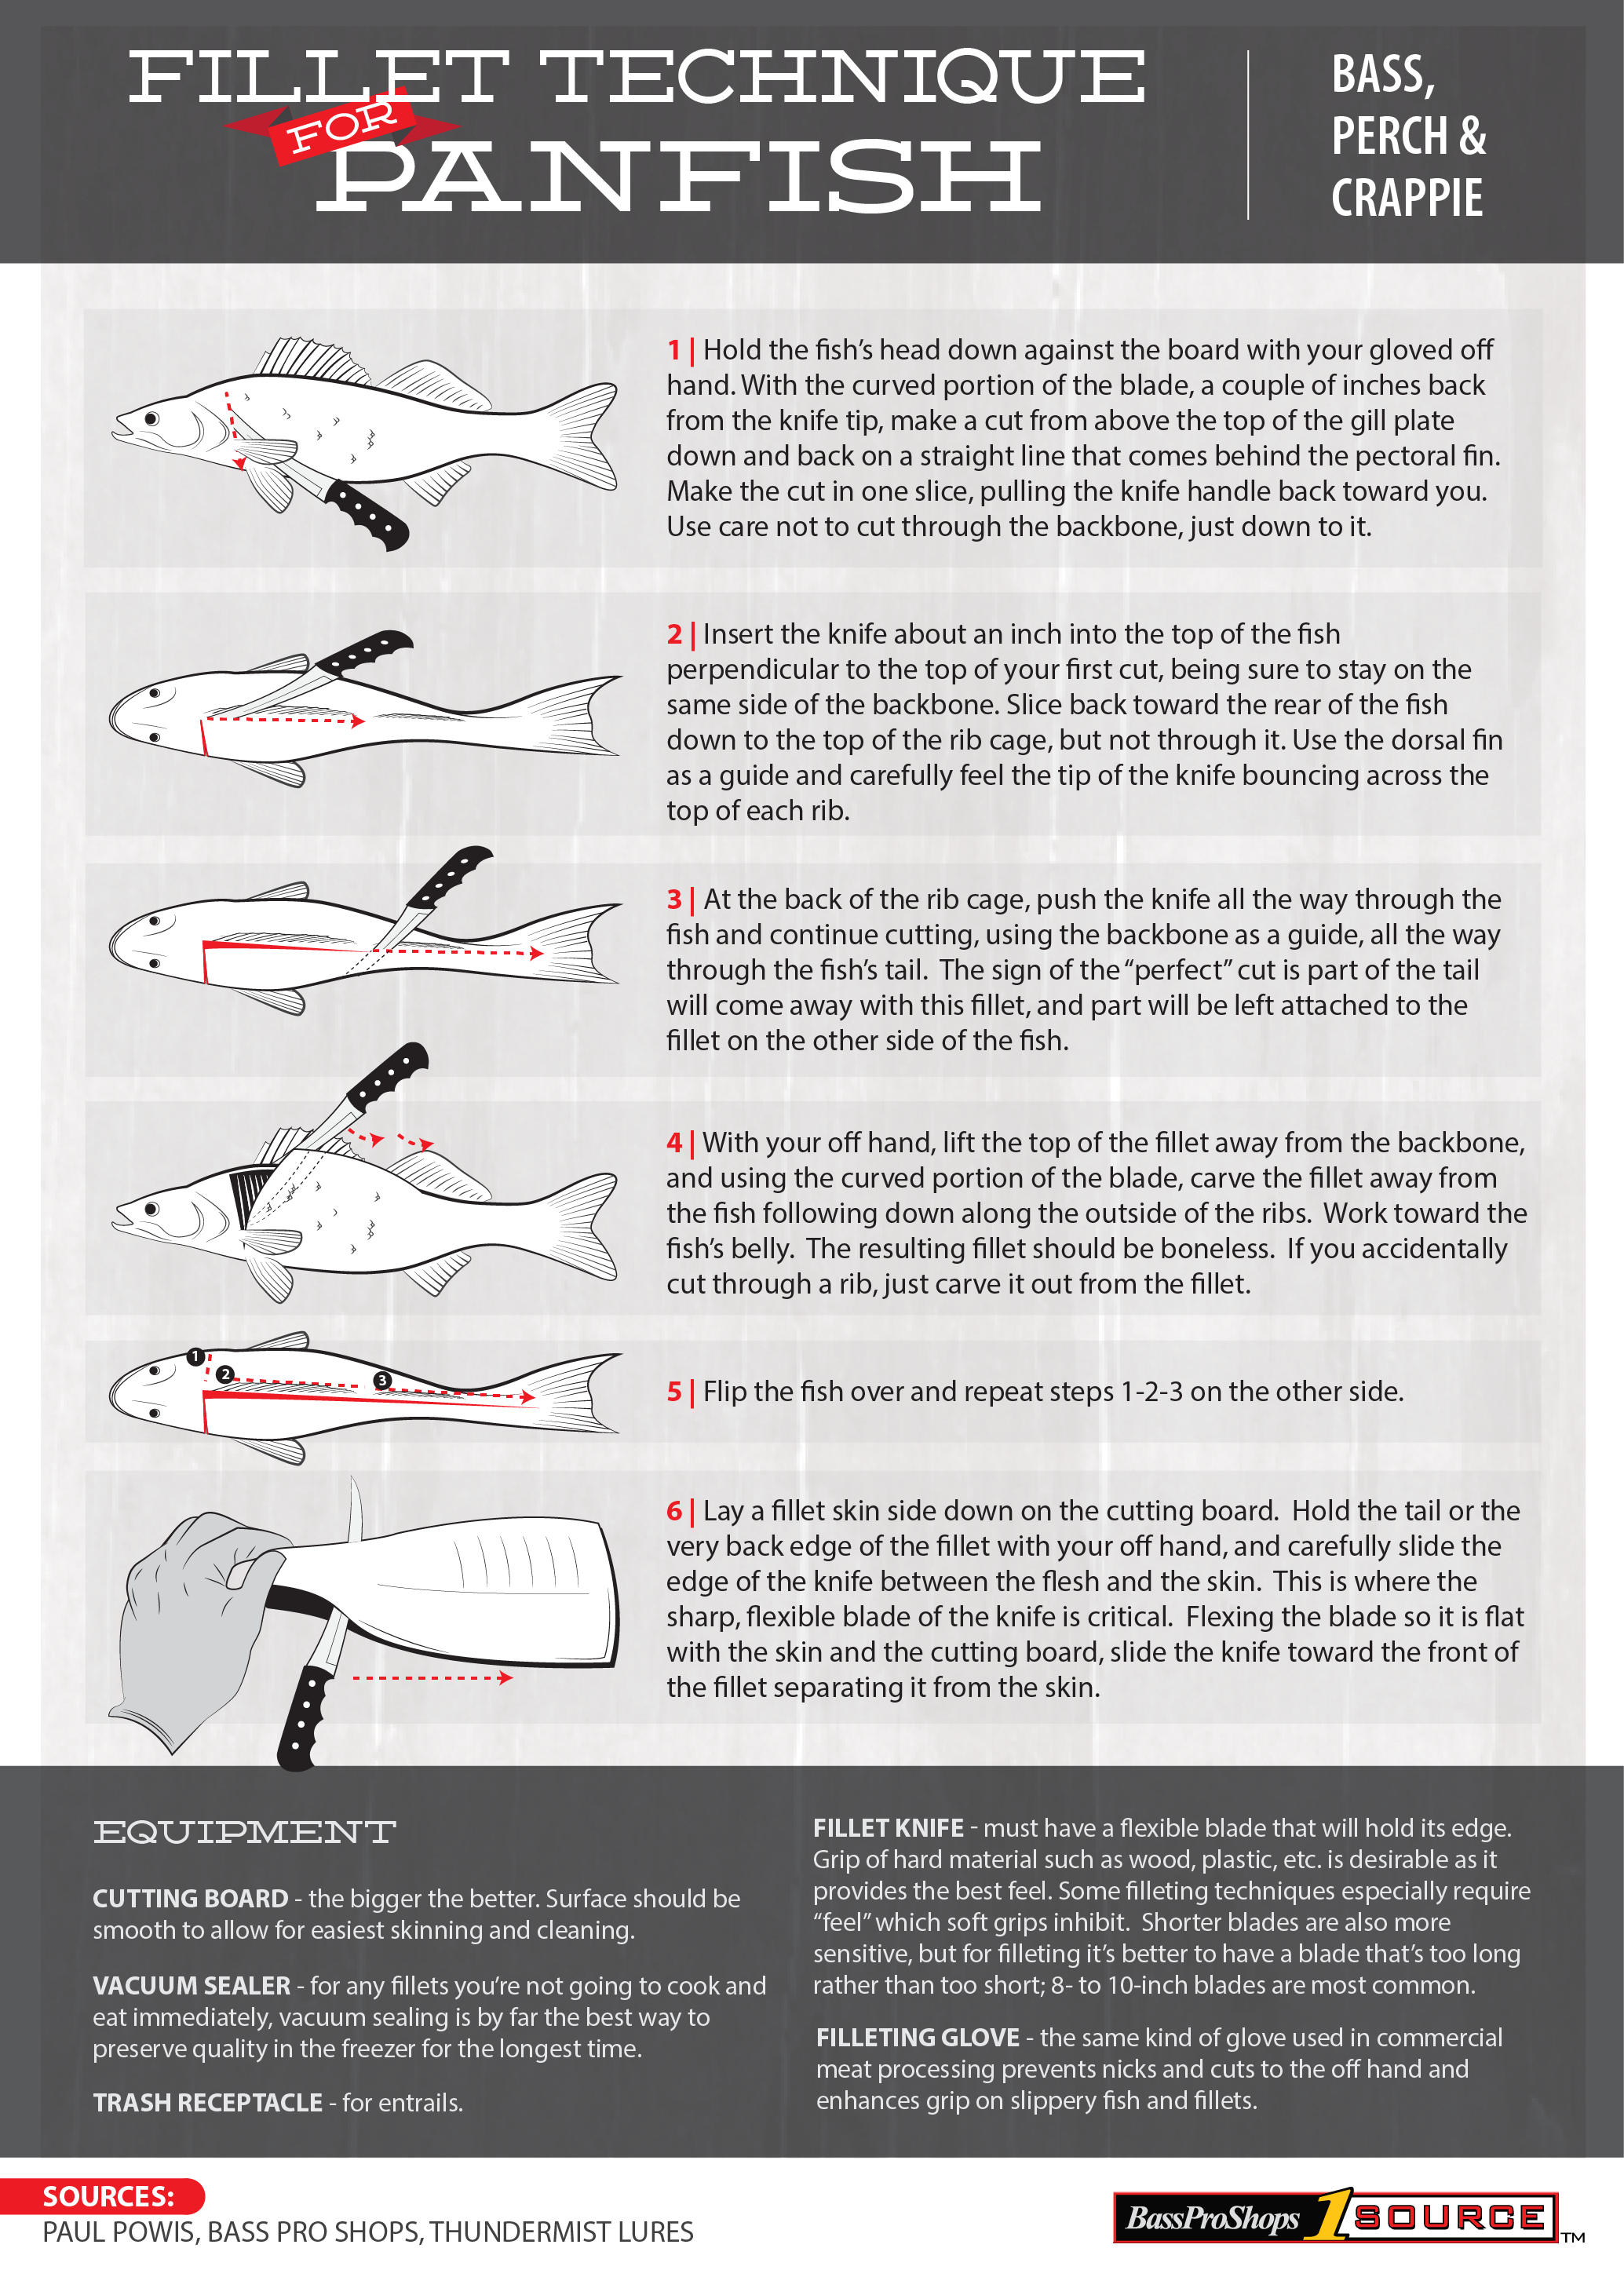 How to Fillet a Bass Fish